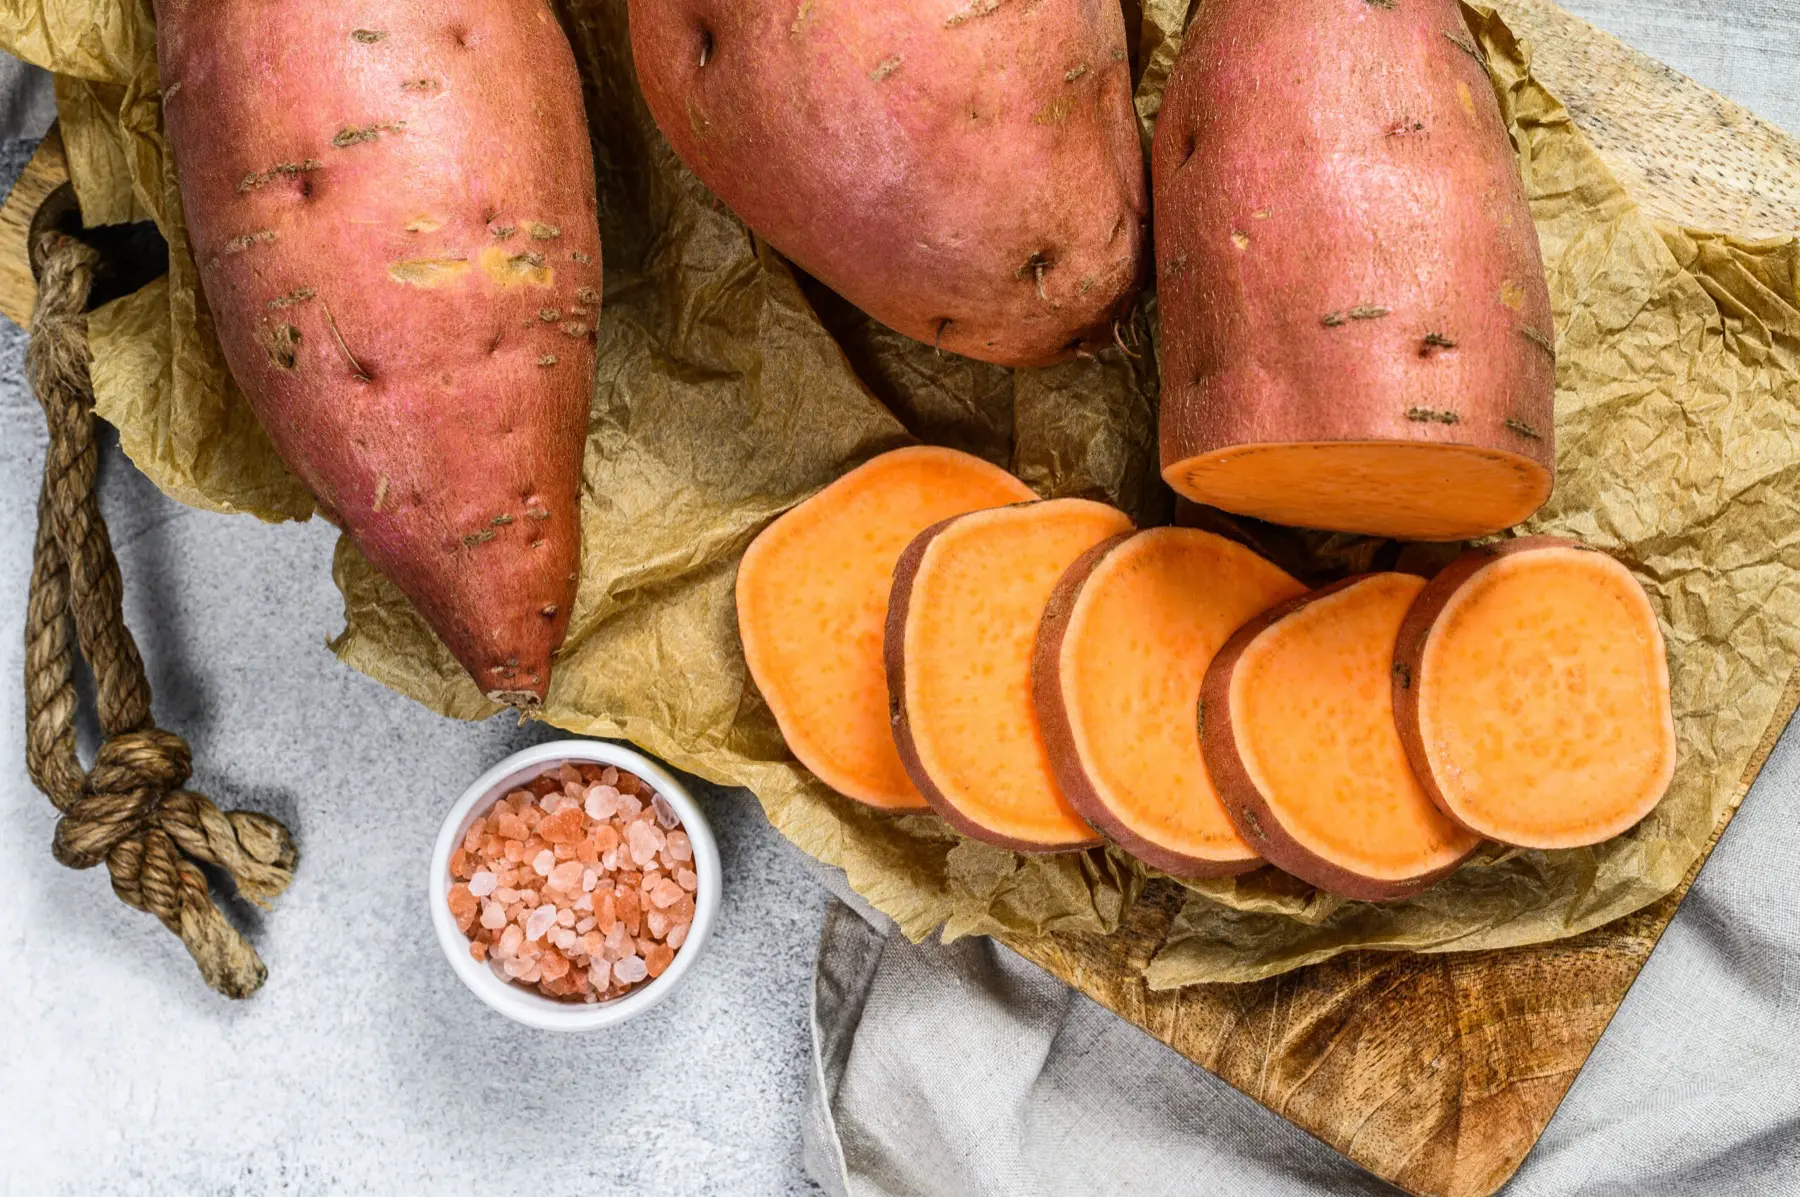 Featured image for “Baked Sweet Potatoes and Yams”